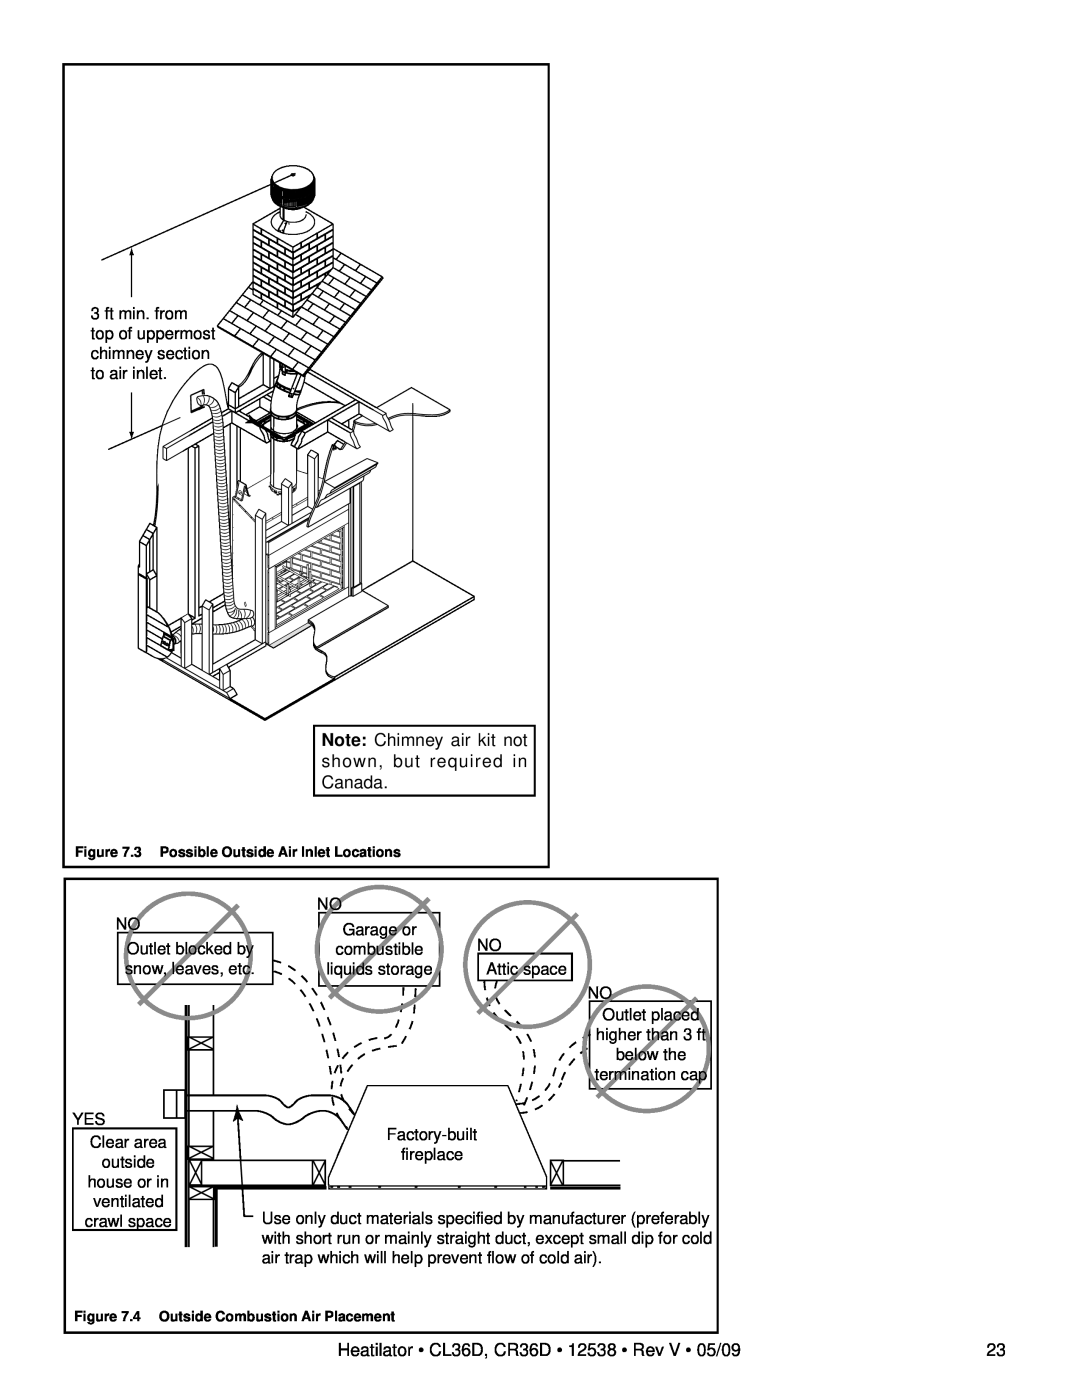 Heatiator Note Chimney air kit not, shown, but required in, Canada, Heatilator CL36D, CR36D 12538 Rev V 05/09 